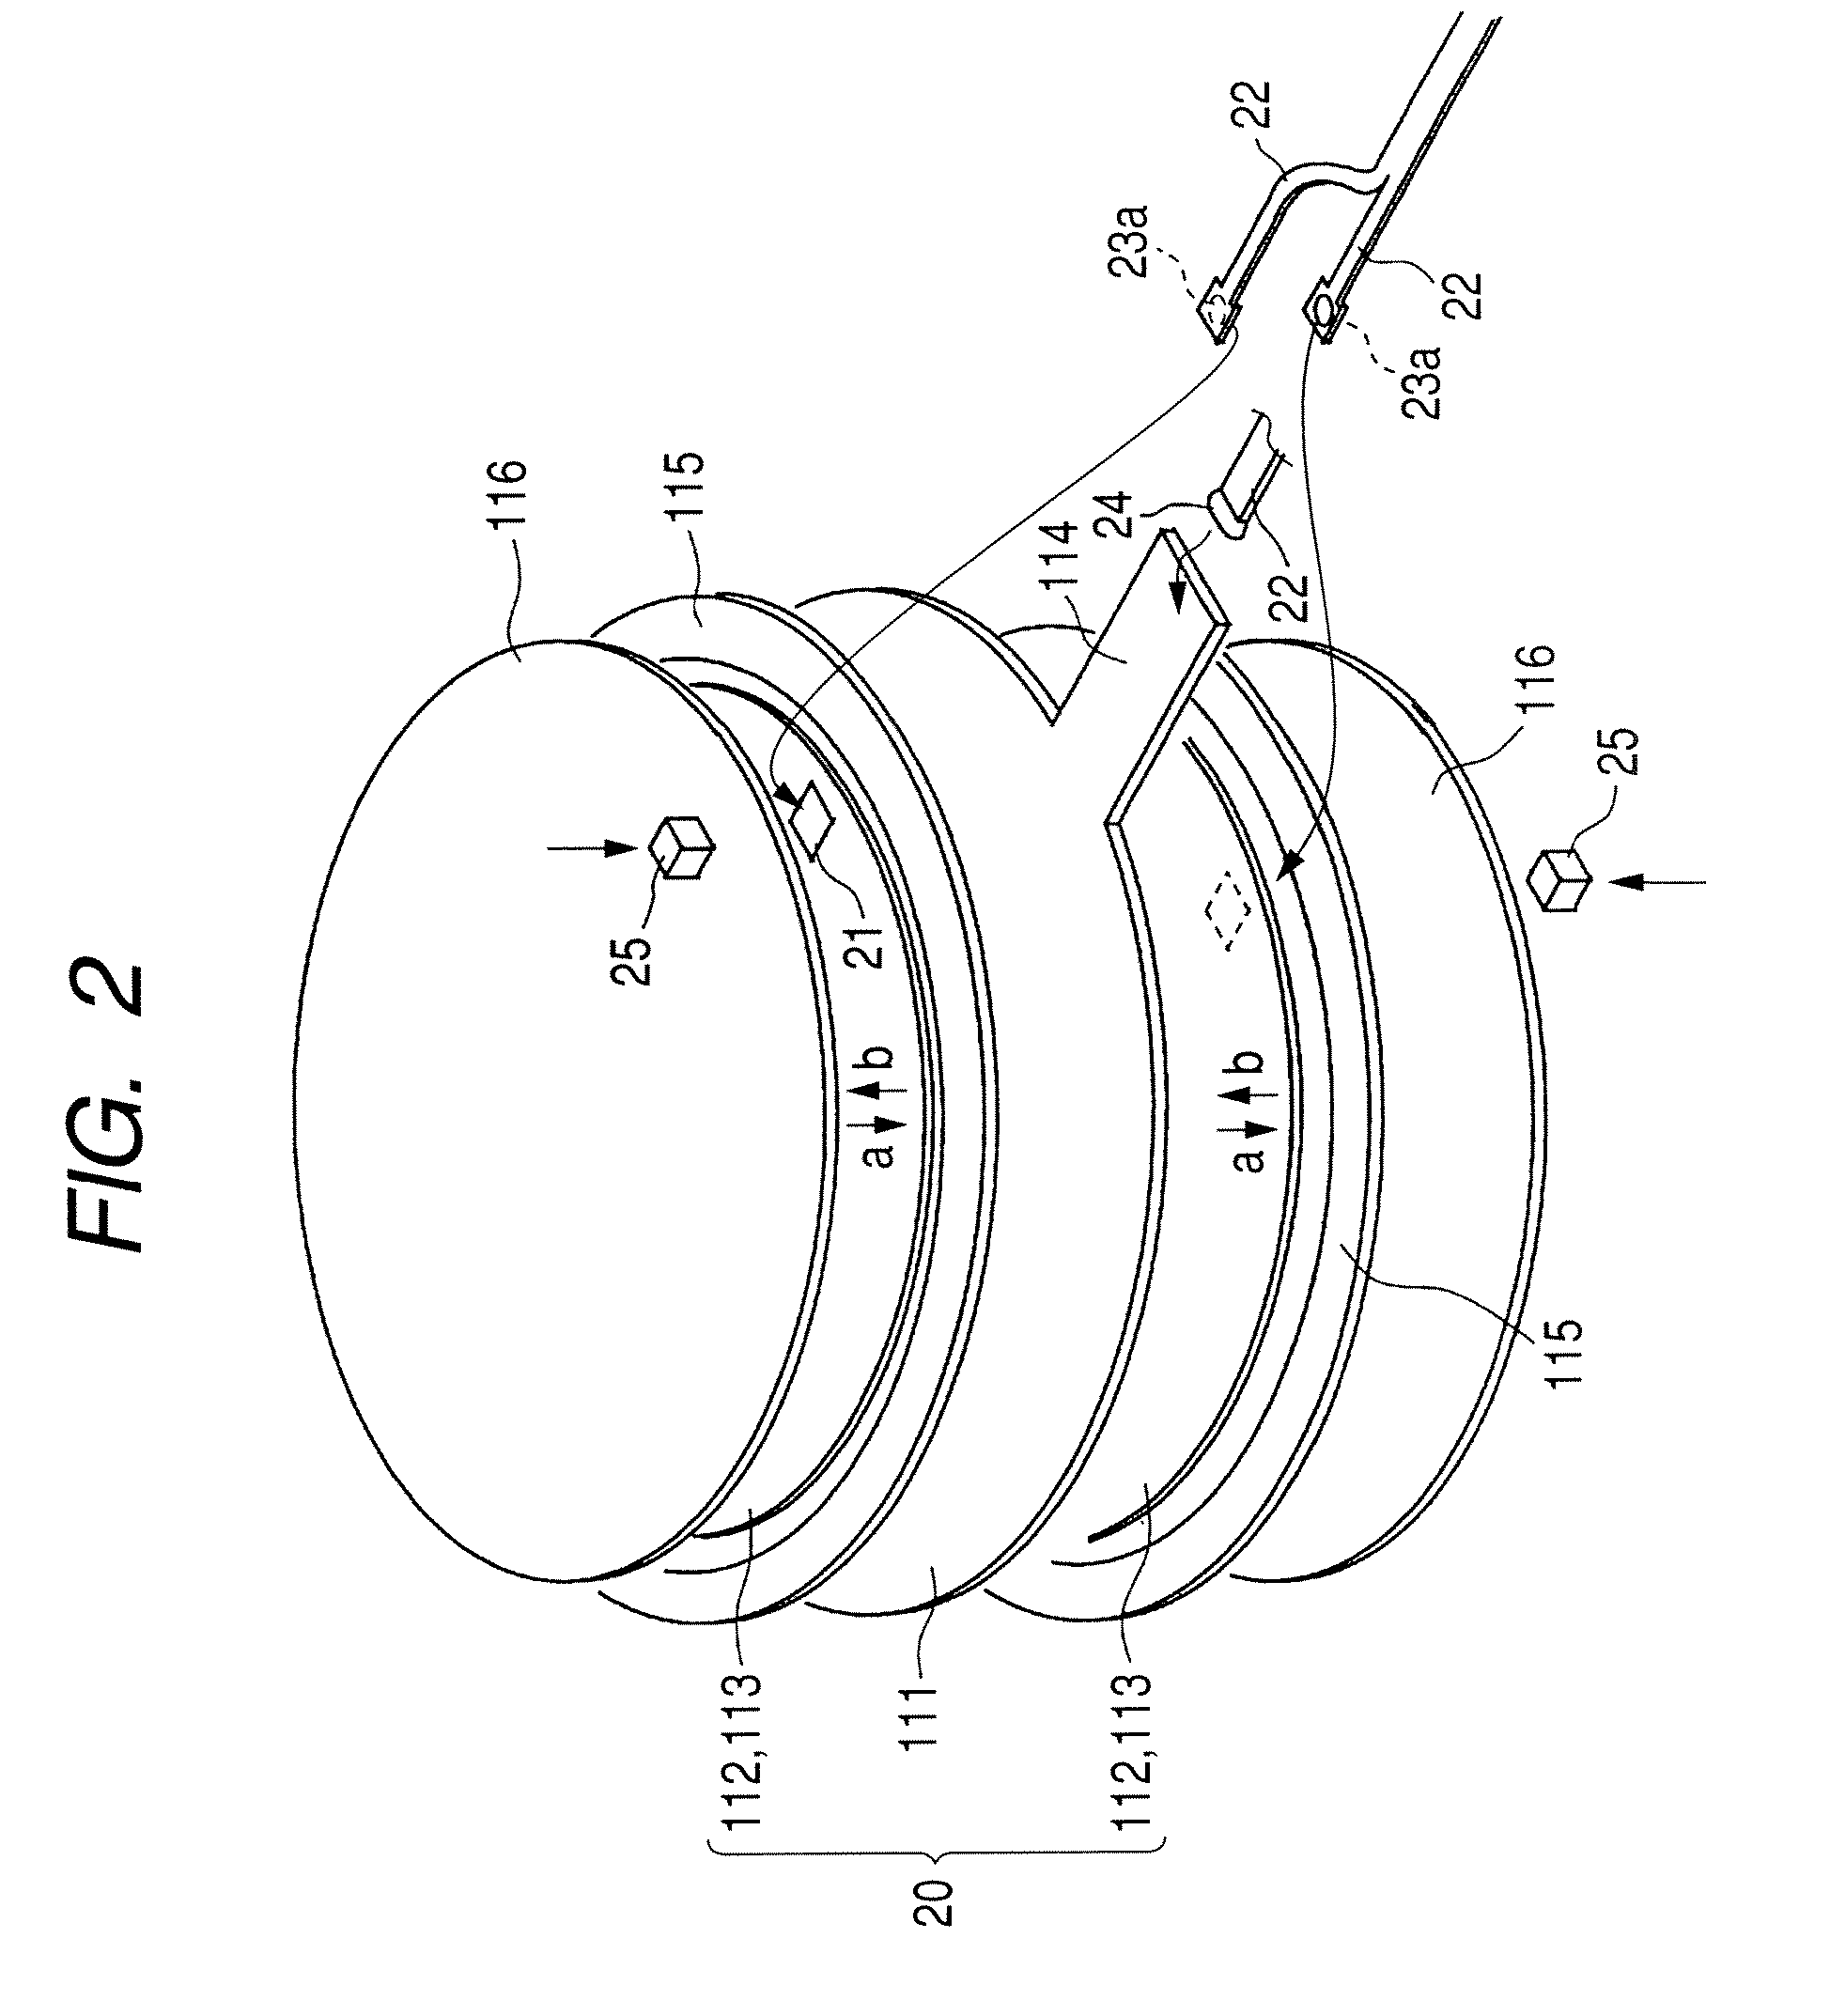 Wiring structure of vibrator, and piezoelectric pump